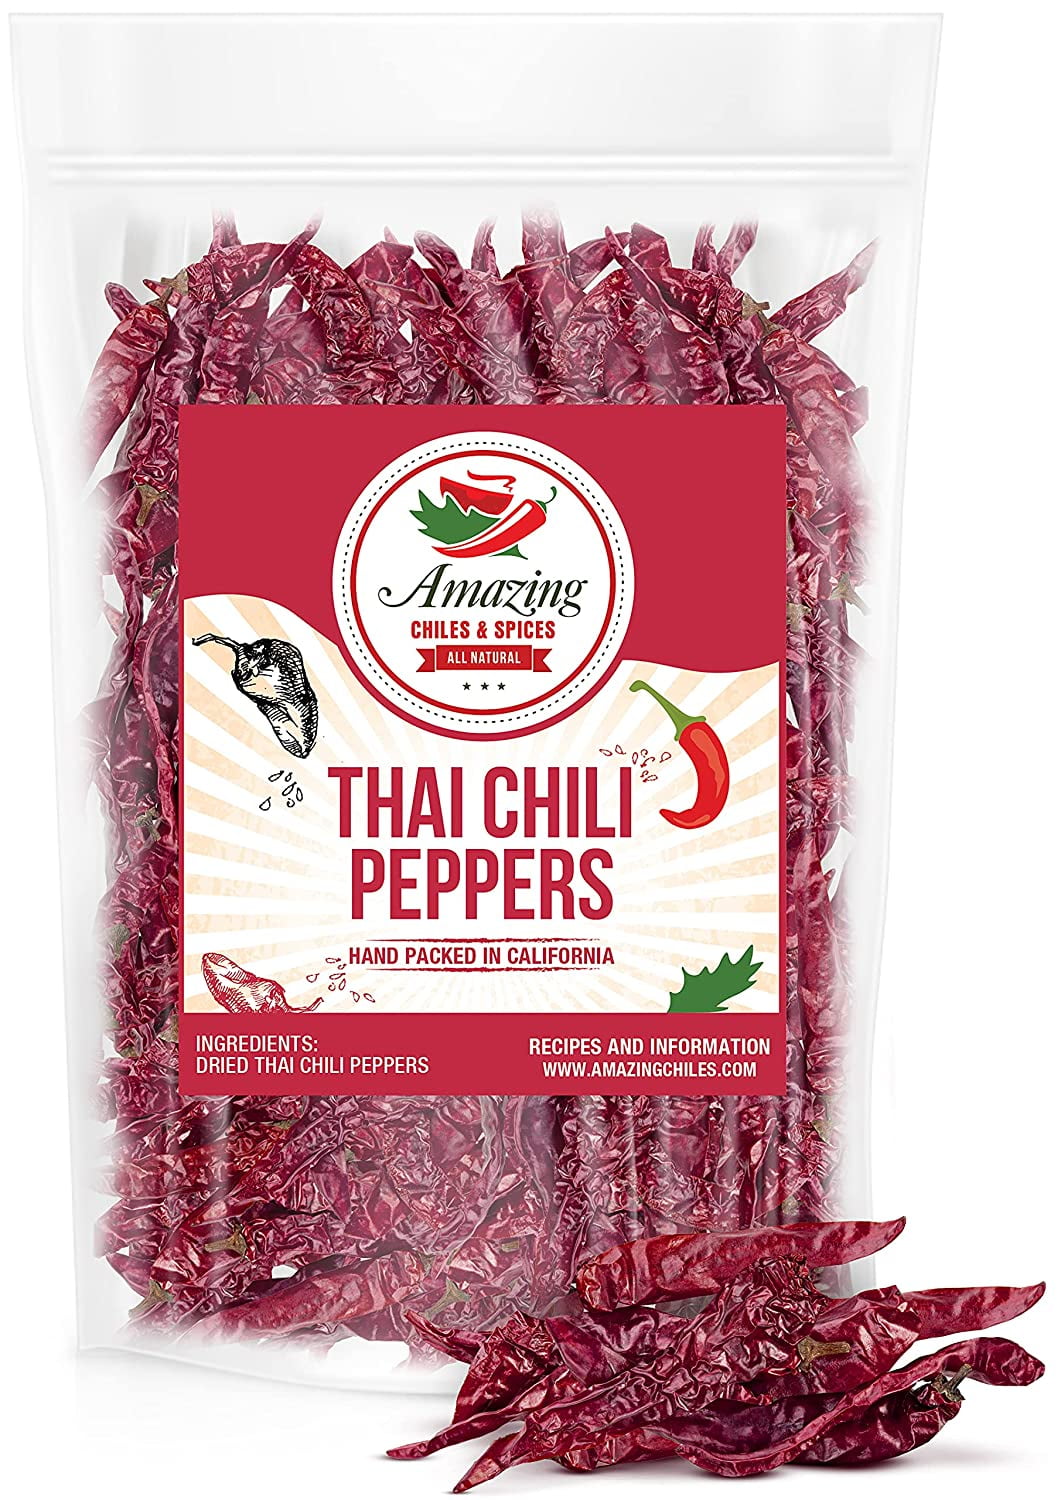 Red Thai Chili Peppers 5 Oz Red Hot Pepper Chilis For Cooking Traditional Asian Foods Soups And Curry By Amazing Chiles Spices 043fec0c Ddab 4c7b B920 6c2ed044e9e8.c382c5a137b41ff80e78e20a689c052b 